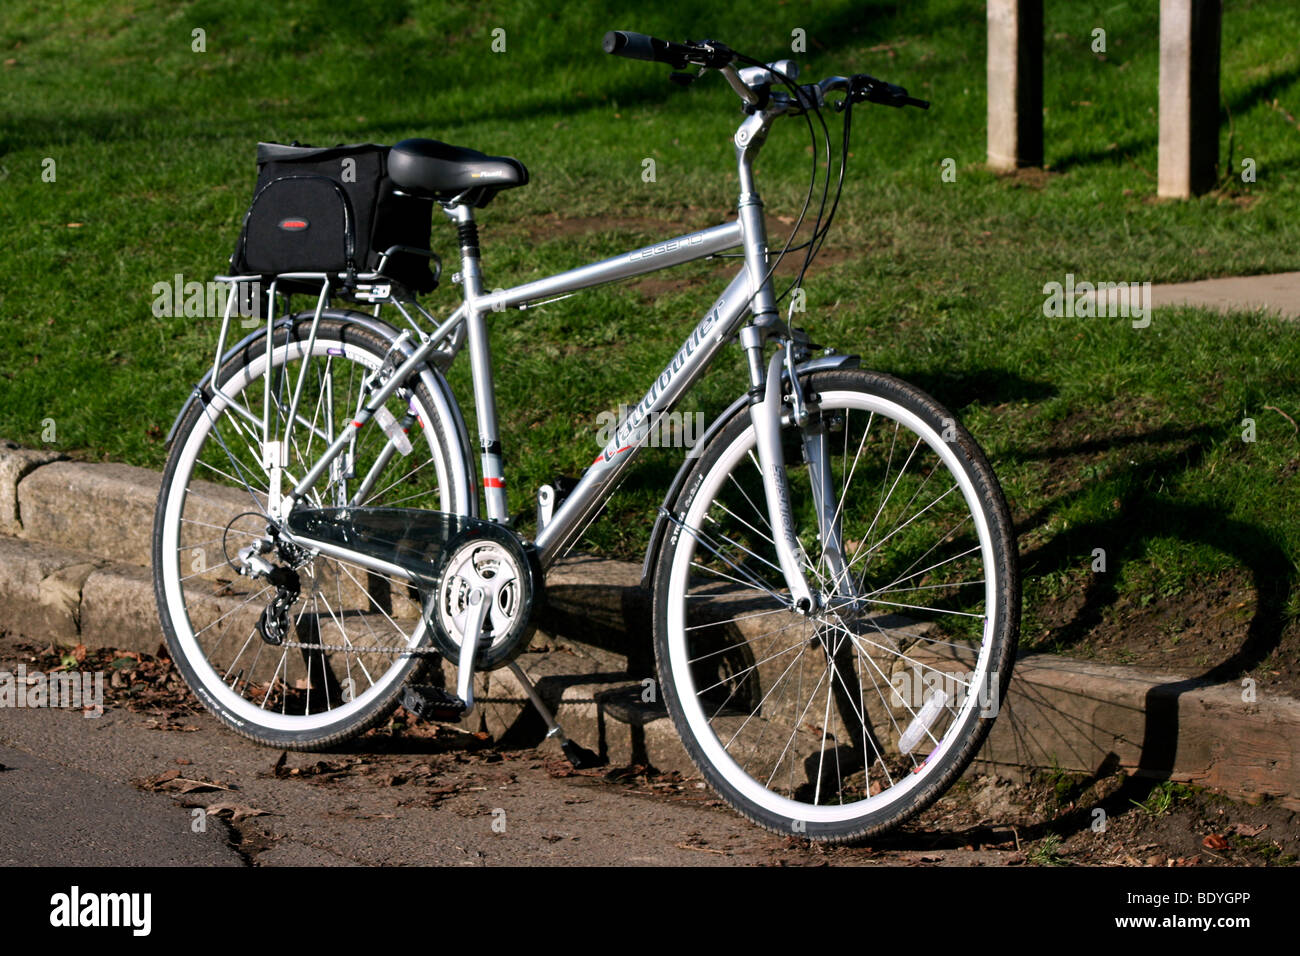 Claud Butler SR Suntour bicycle on its stand Stock Photo - Alamy